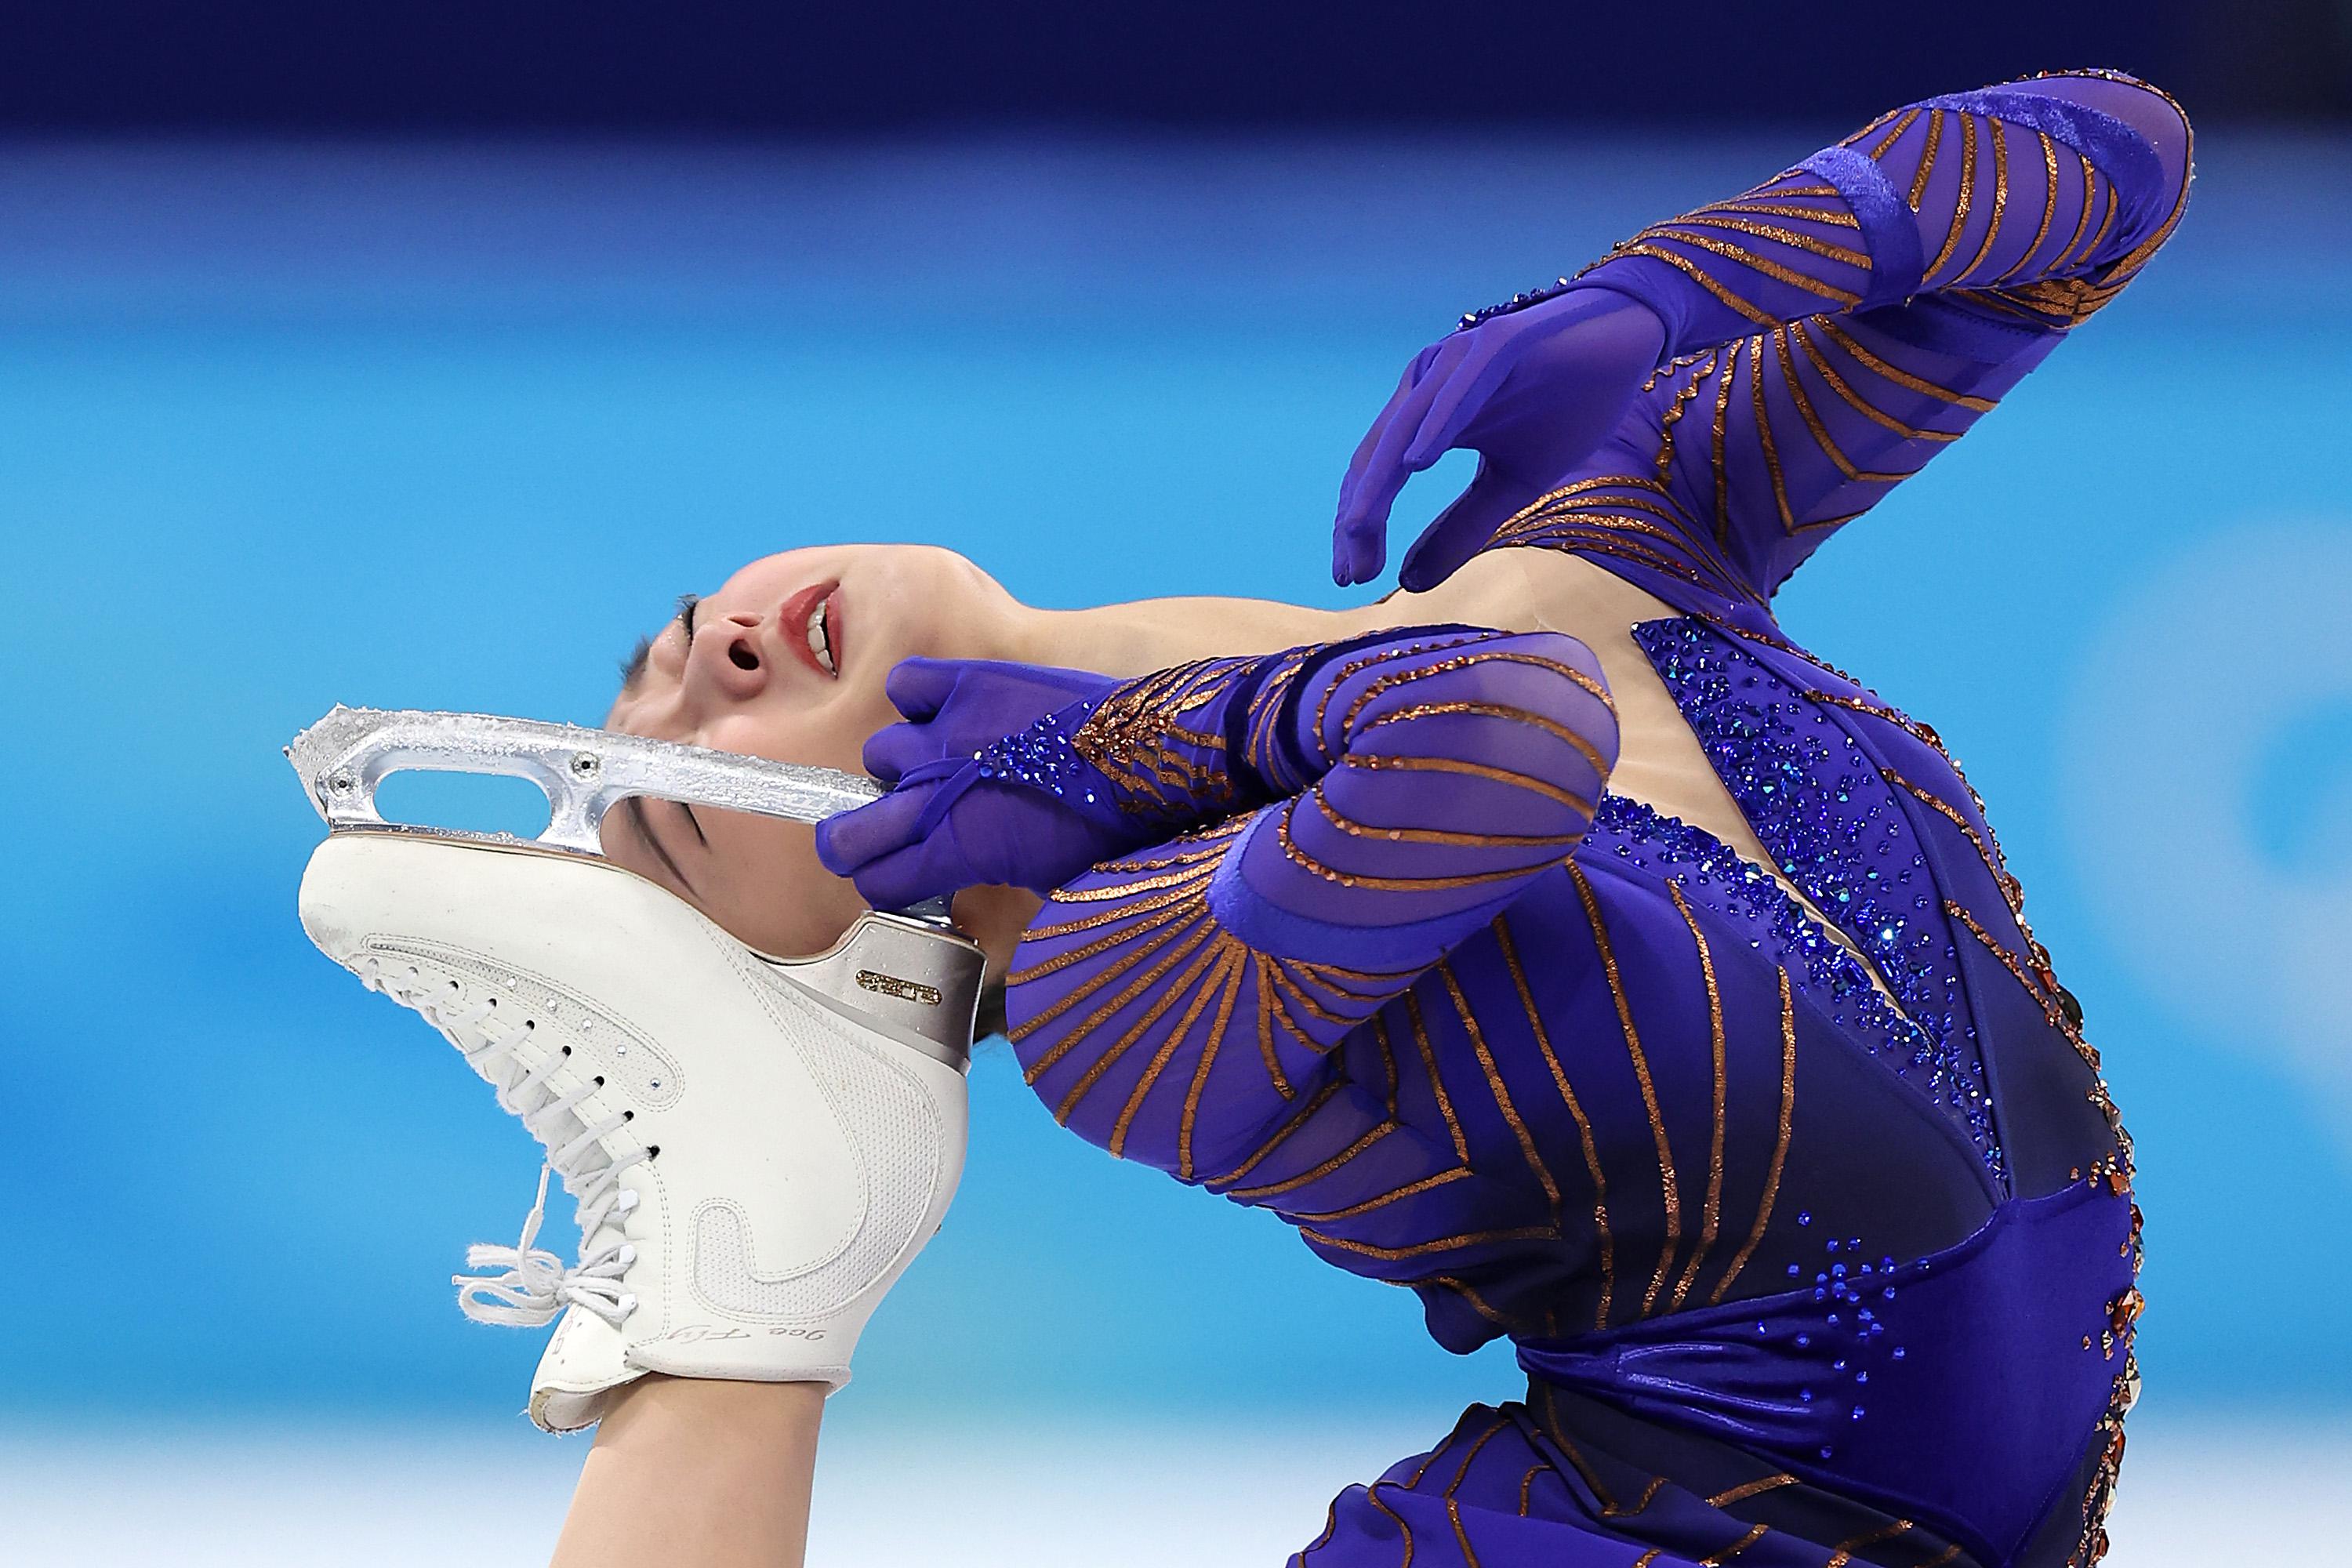 Sakamoto lifting her skate behind her head and leaning backward with her eyes closed on the ice